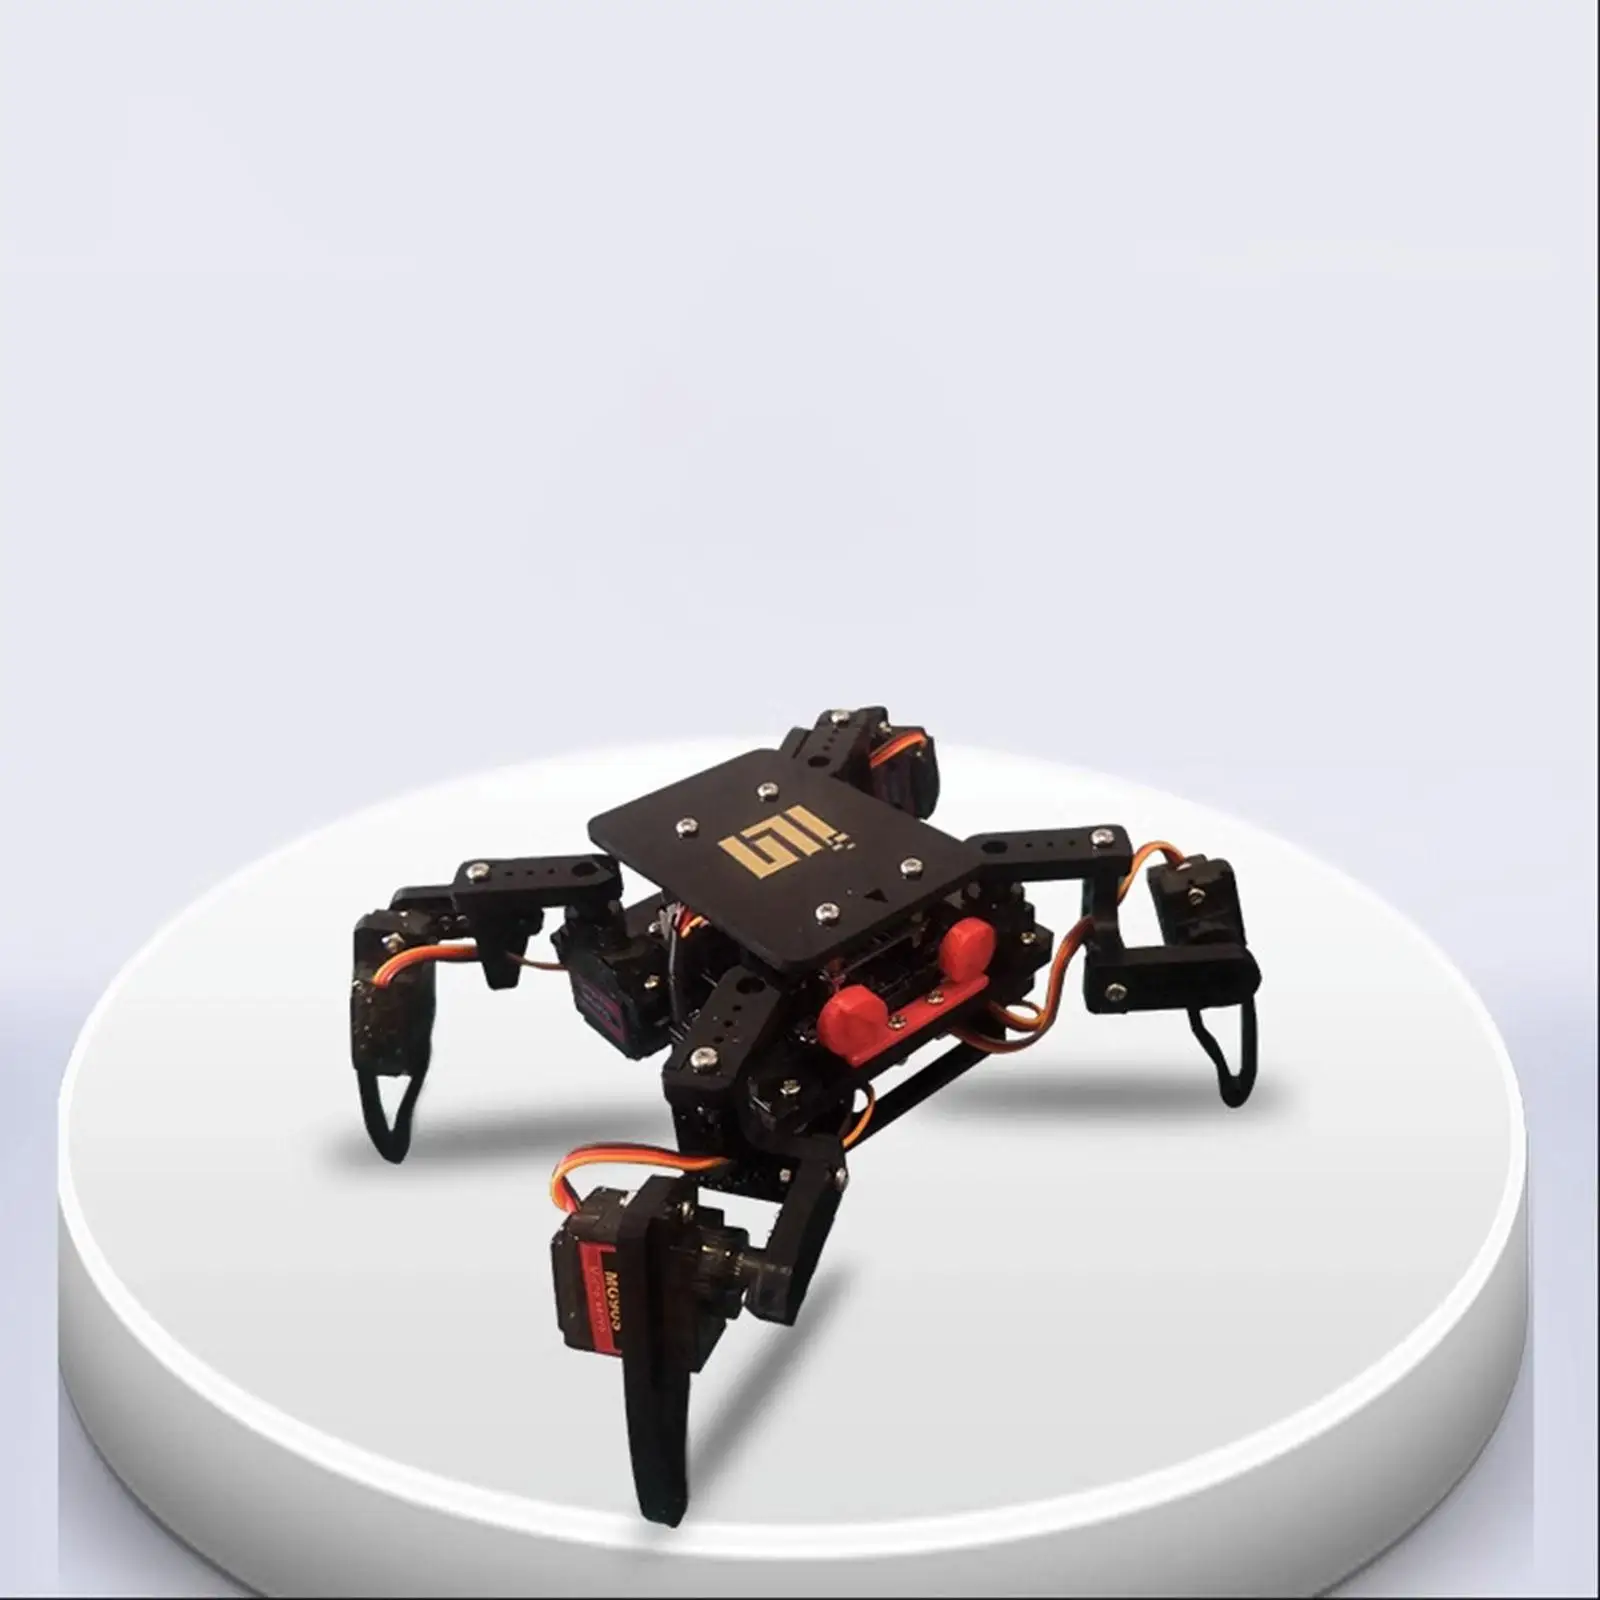 Quadruped Robot Kits App Control Scientific Building Kits for Kids to Learn Program Teaching Aids Birthday Gifts Teens Kids